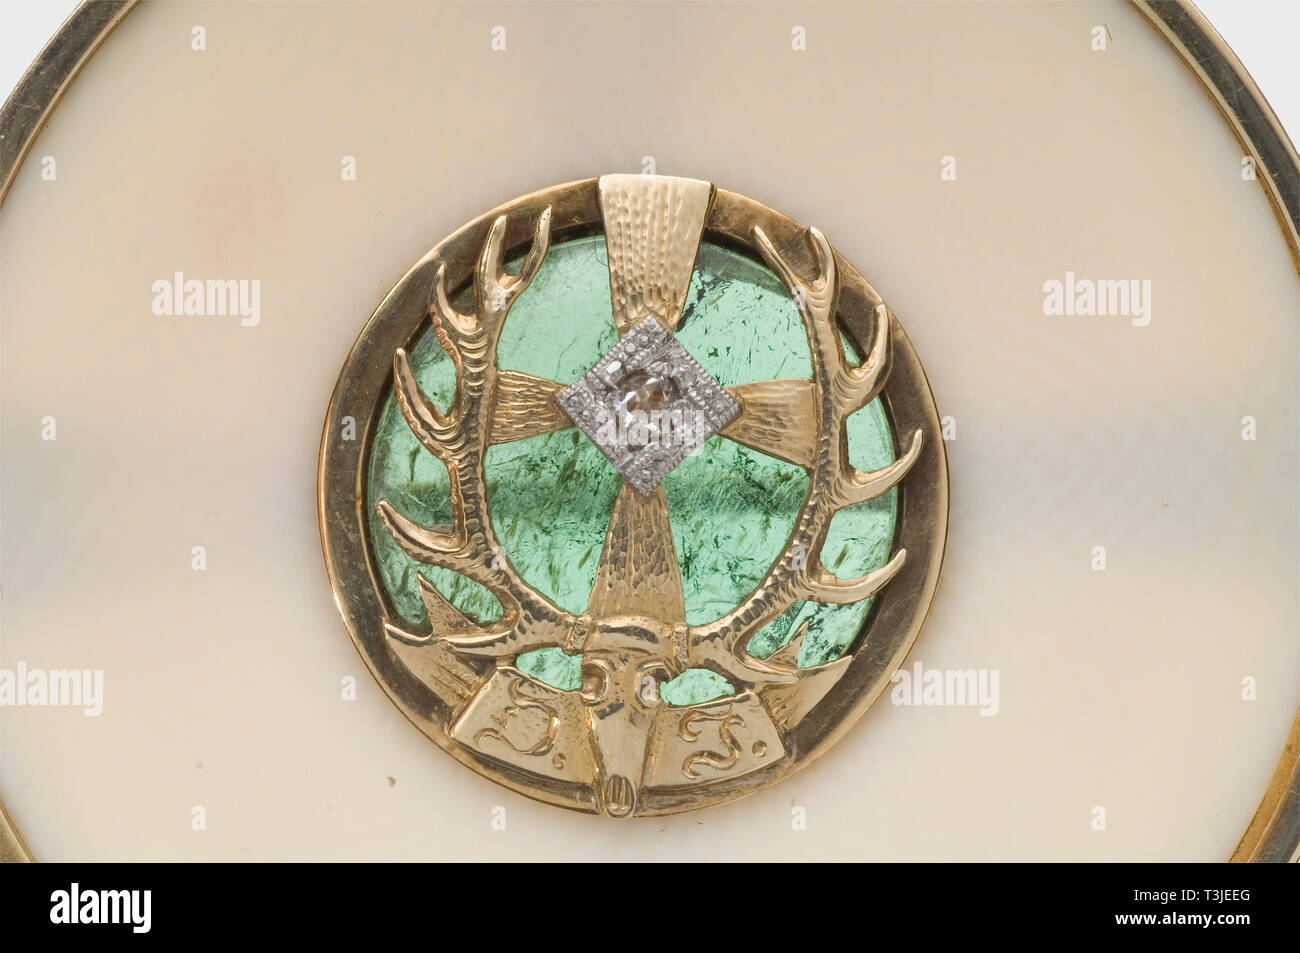 Hermann Göring, House Order of Carinhall Gold, platinum, ivory, diamond, and tourmaline. In the centre an openwork St. Hubert's deer head of gold, with diamond studded swastika and monogram "D.J." over tourmaline set à jour. The back with fastening pin. Diameter 43 mm, weight 14.5 g. The monogram refers to the Reichsbund Deutsche Jägerschaft (German Hunting Association), which was subordinate to Hermann Göring as "Reichsjägermeister" (Master Huntsman of the Reich). The House Order of Carinhall was a hunting order awarded by Hermann Göring in Carinhall to female relatives or, Editorial-Use-Only Stock Photo